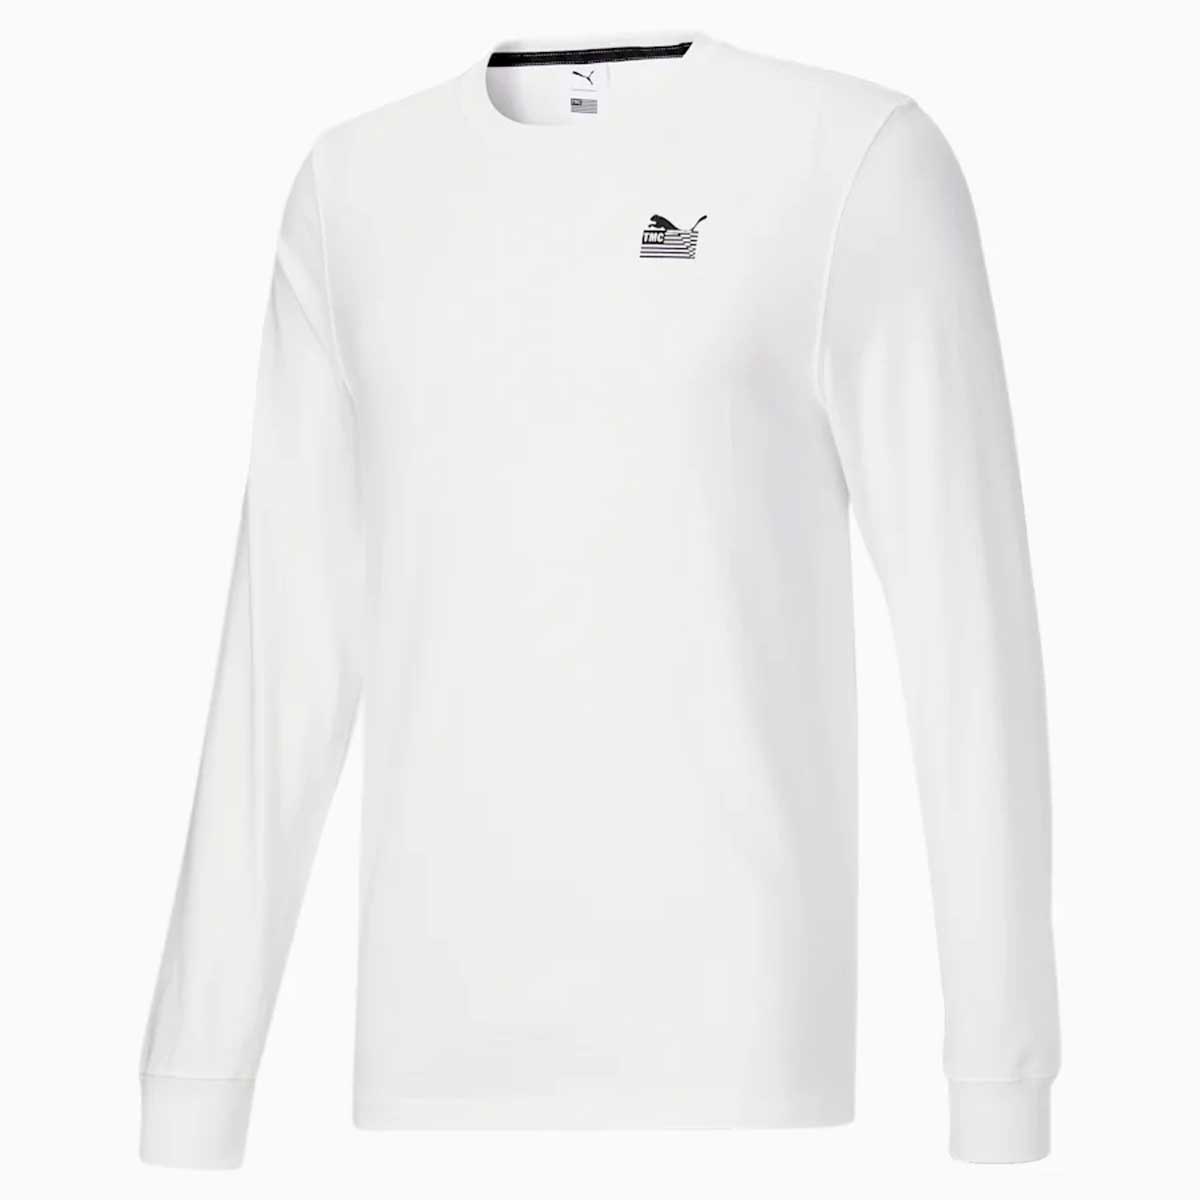 PUMA x TMC Everyday Hussle Collection Long Sleeve Shirt - White